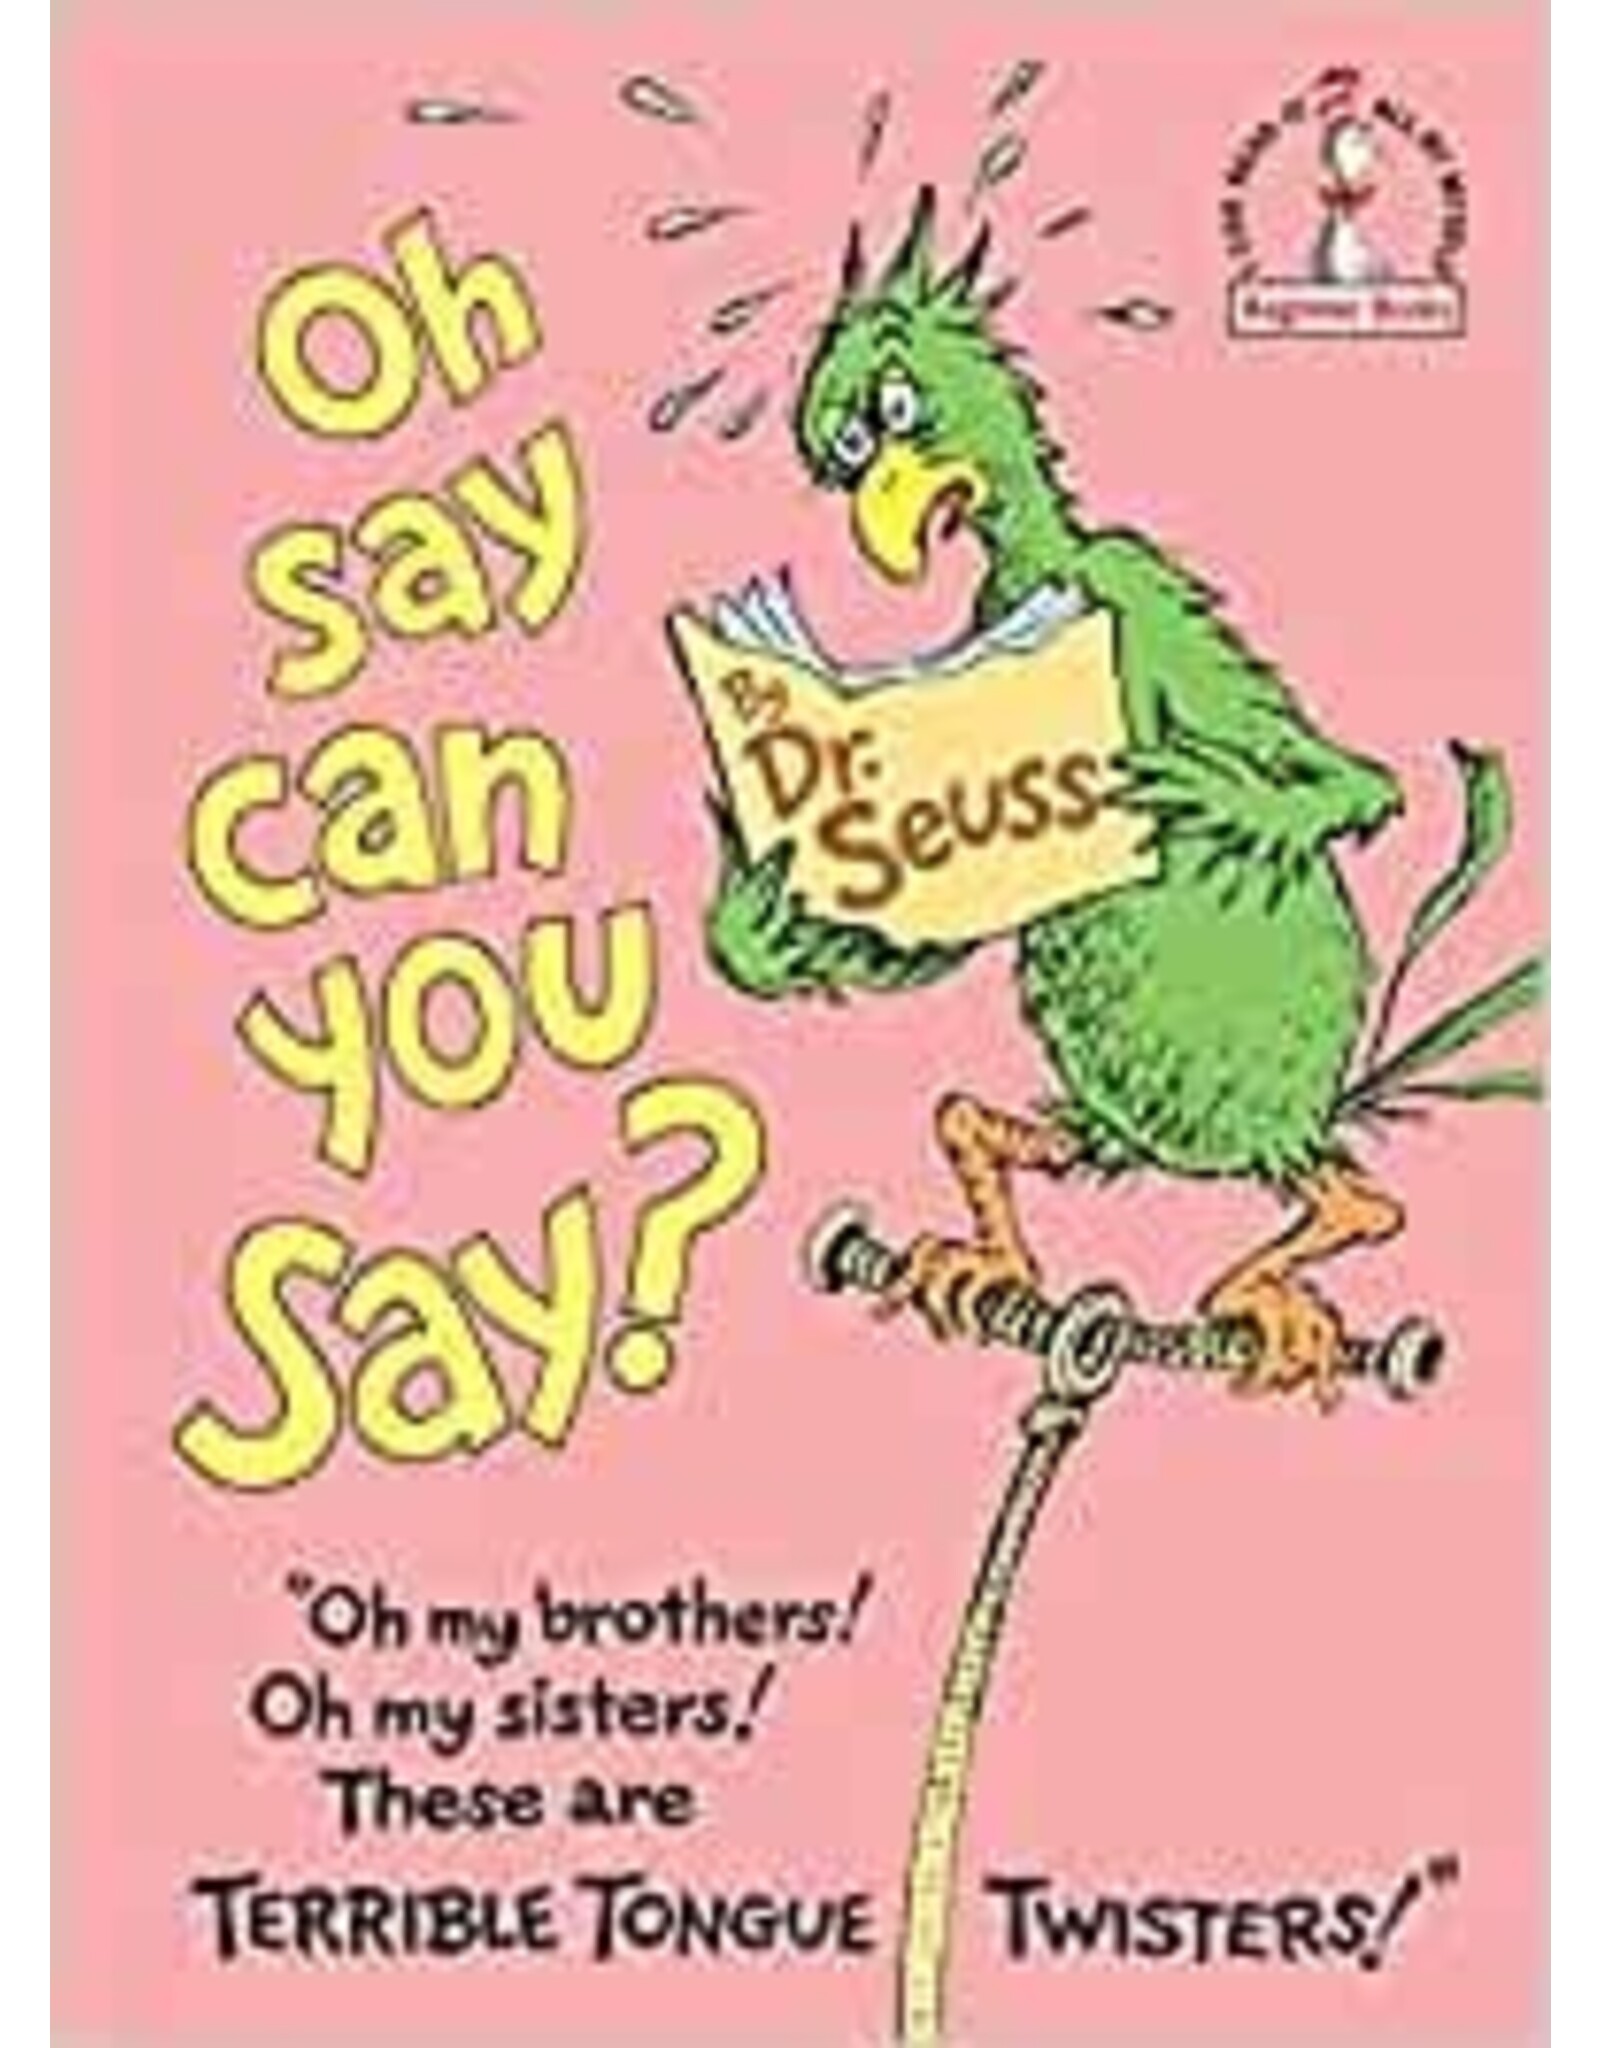 Dr. Seuss Oh Say Can You Say? by Dr. Seuss